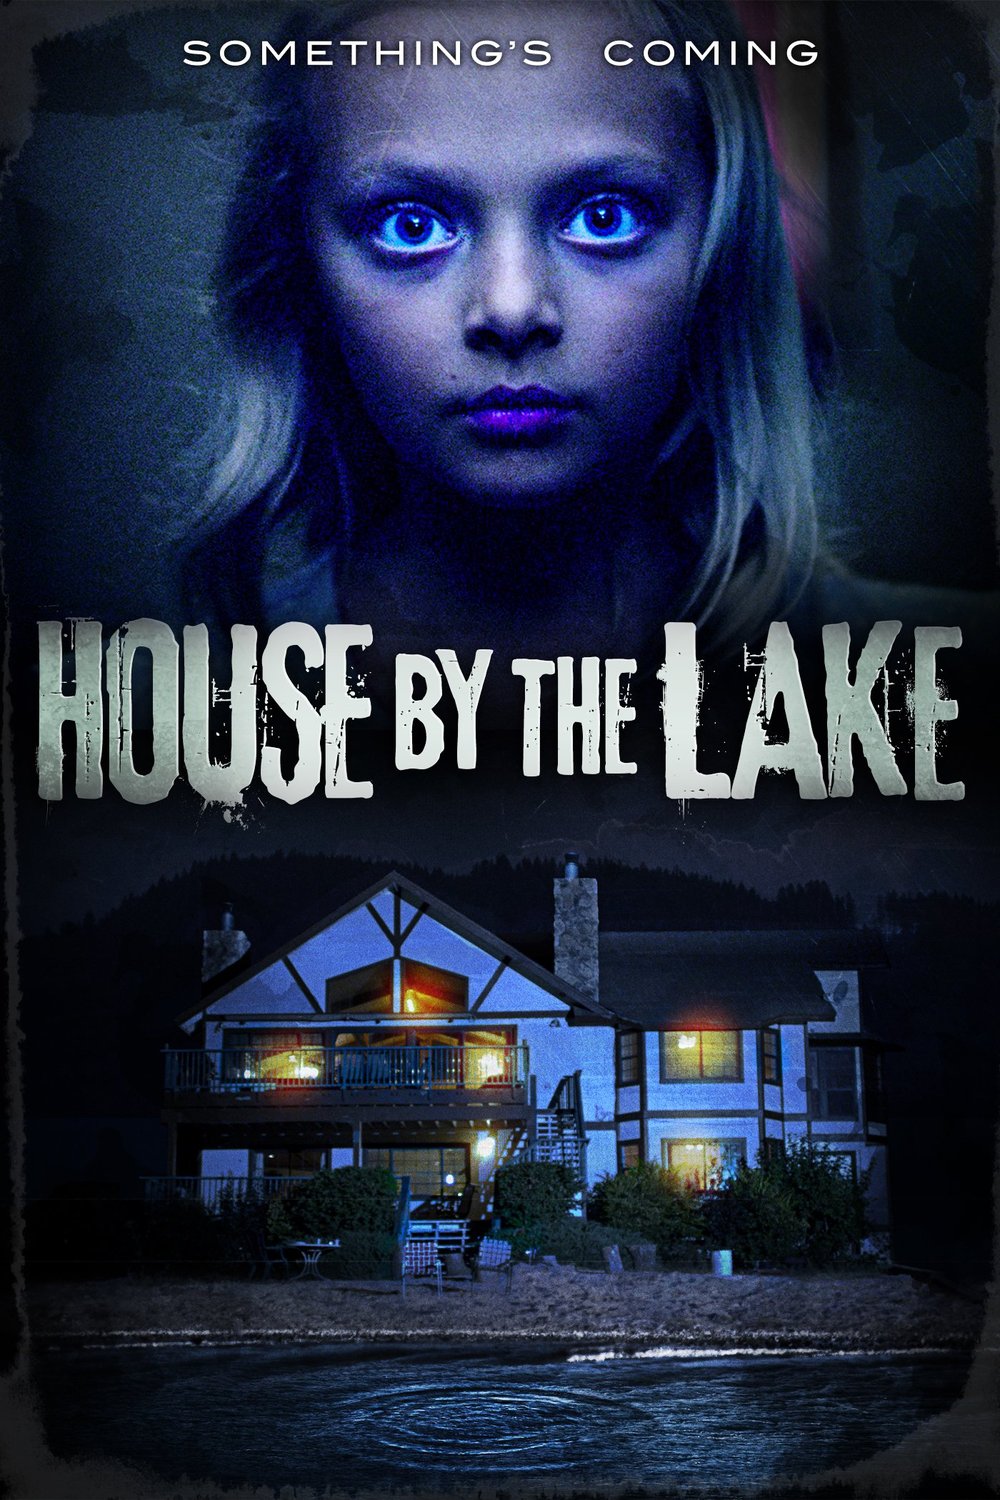 Poster of the movie House by the Lake